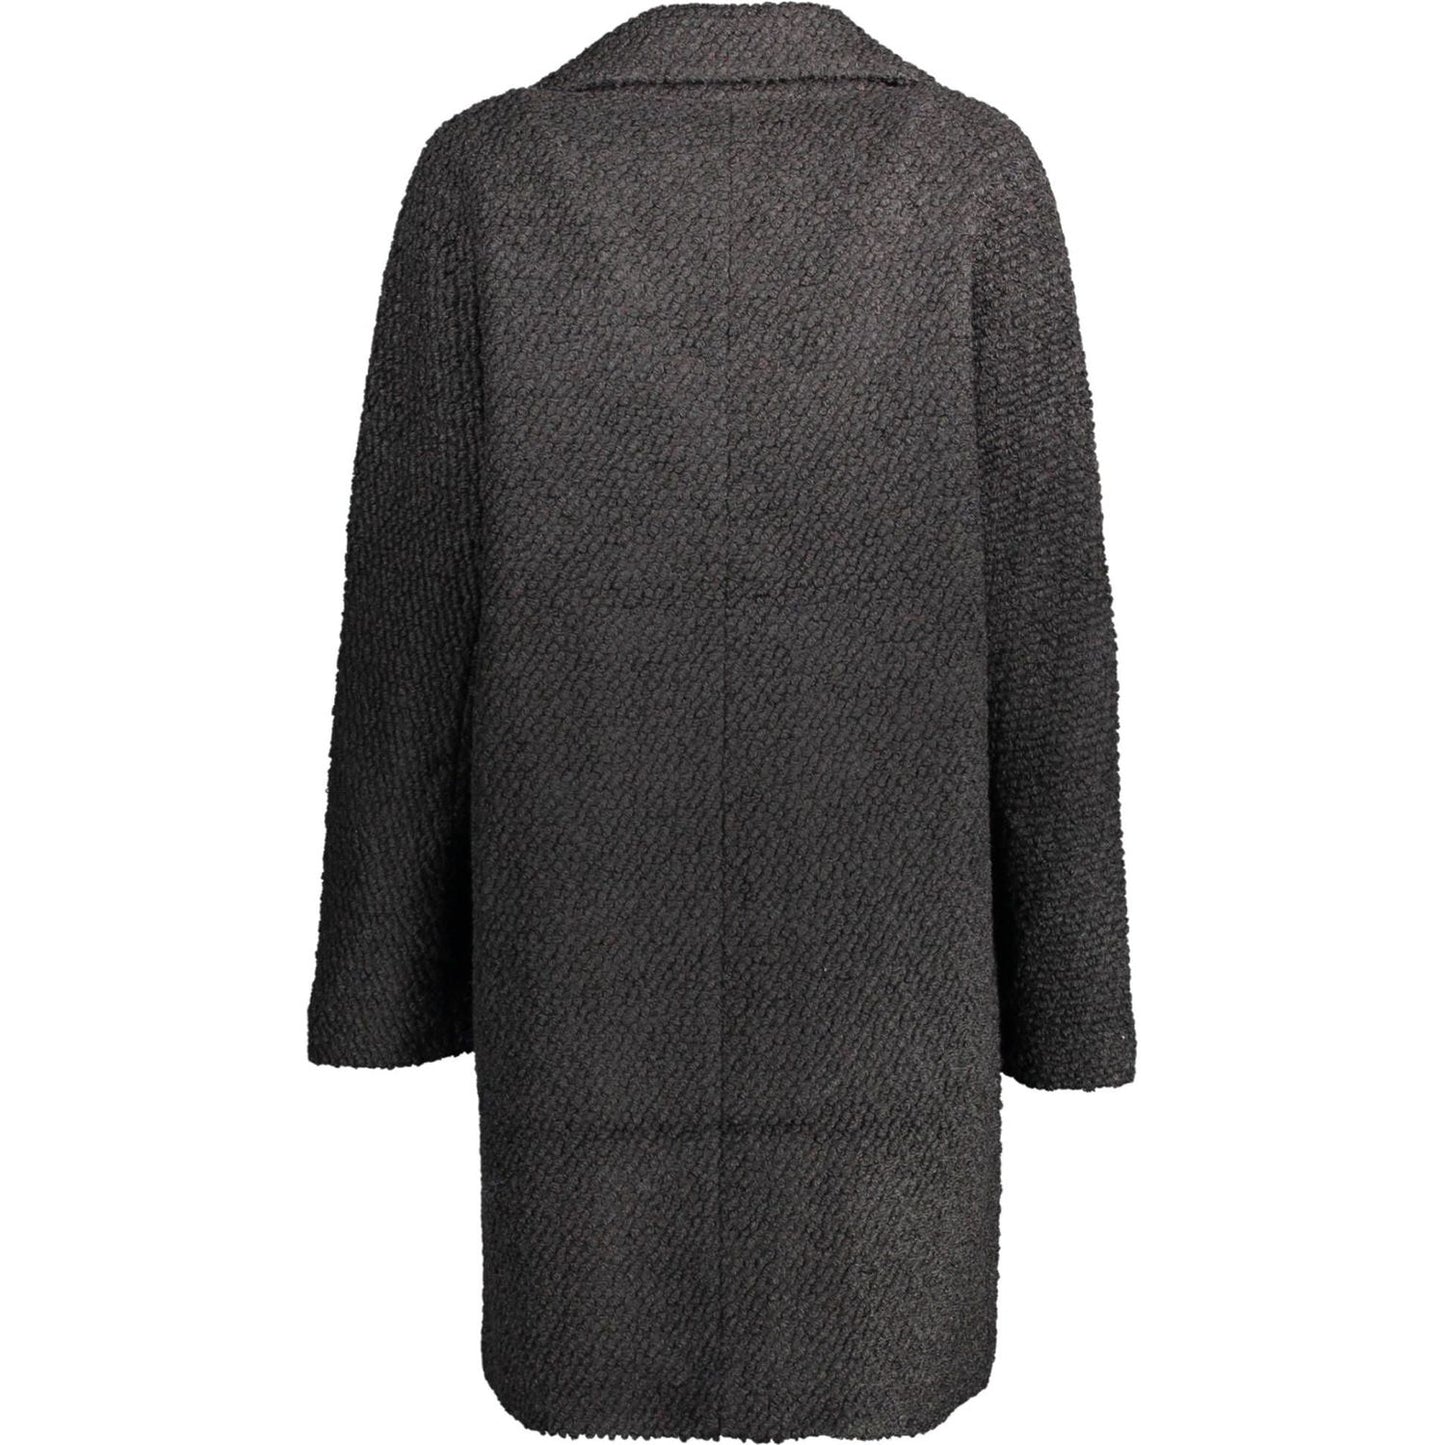 Desigual Chic Wool-Blend Black Coat with Signature Accents chic-wool-blend-black-coat-with-signature-accents